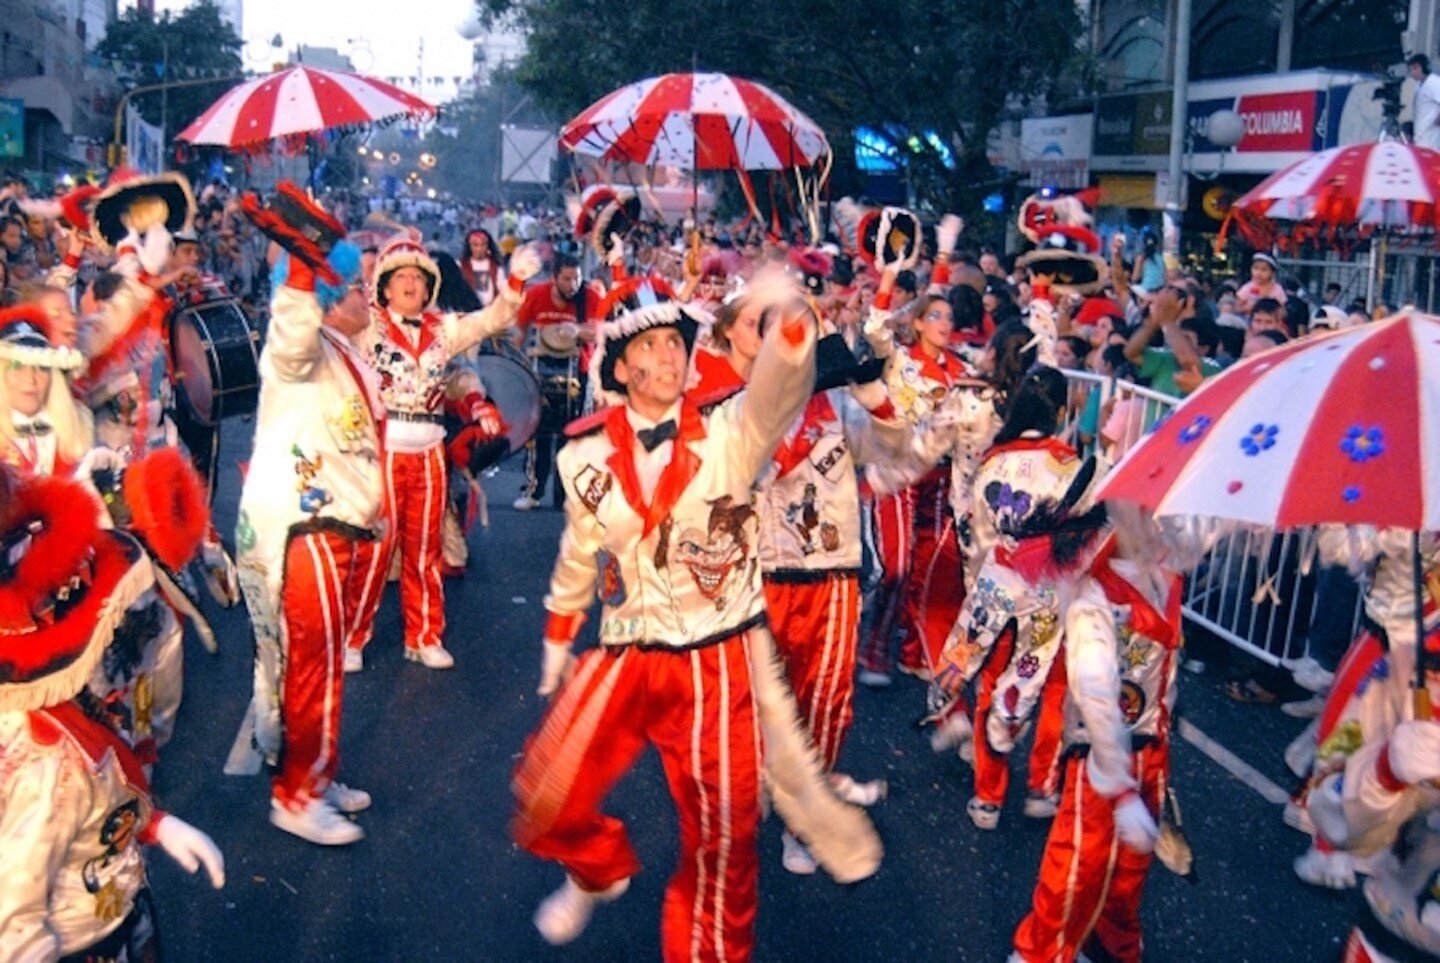 Feliz Carnaval! 🎭🎊🎪 

Although this year may look different than year's past, we hope you all enjoy the feriado. For some history of carnaval in Buenos Aires, check out this article (in spanish): https://www.cultura.gob.ar/historia-del-carnaval-en